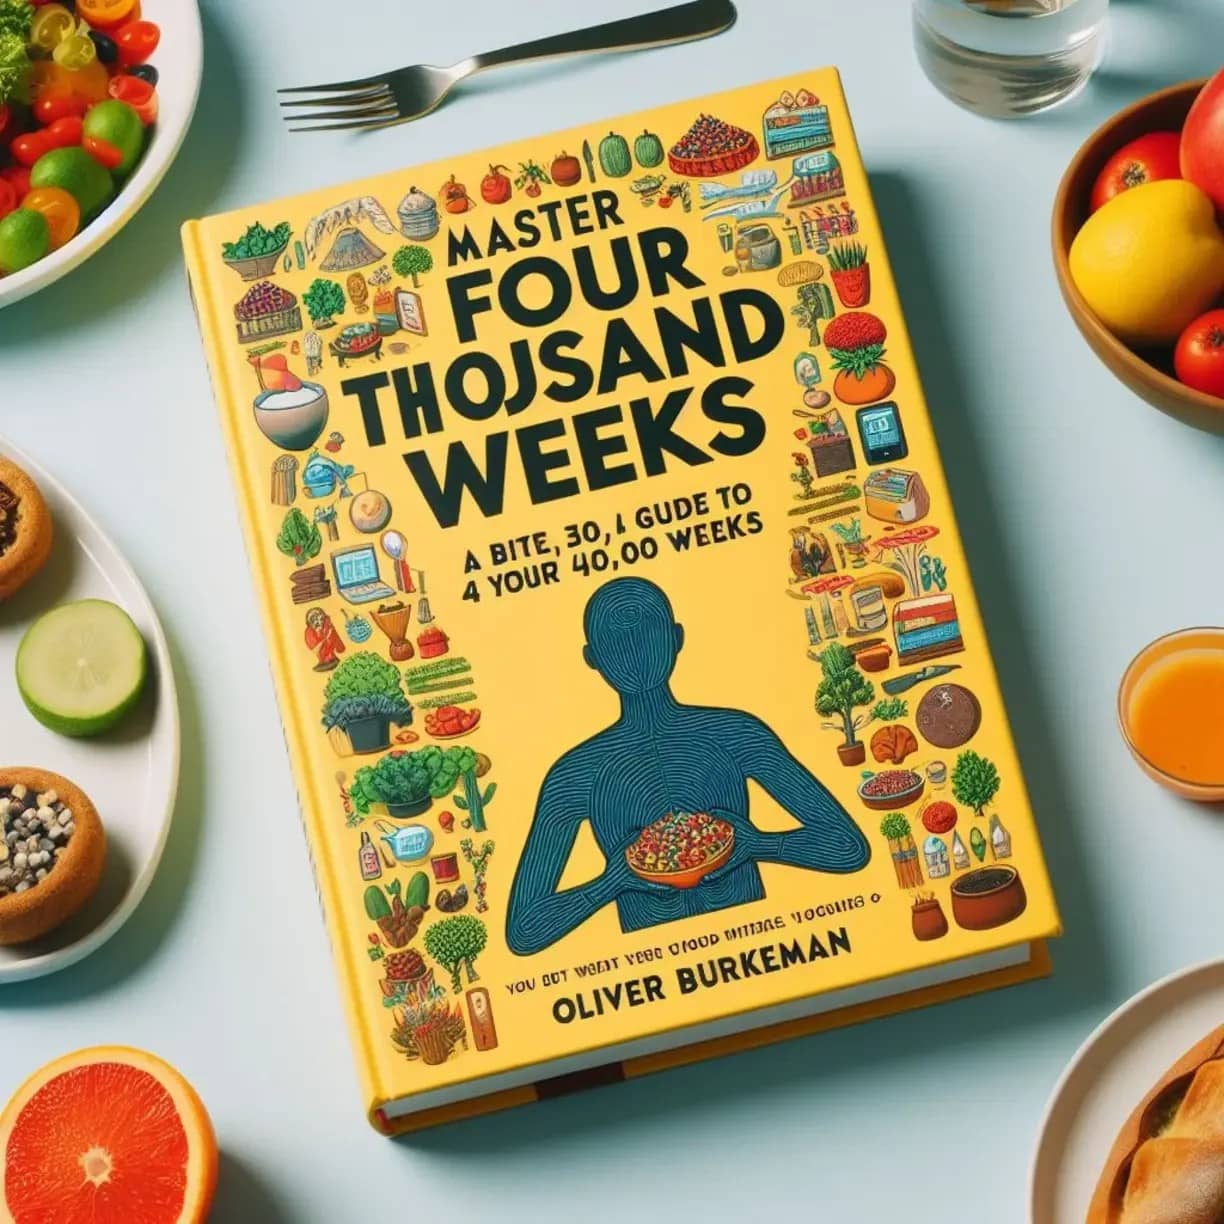 Master Your 4,000 Weeks: A Bite-Sized Guide to "Four Thousand Weeks" by Oliver Burkeman